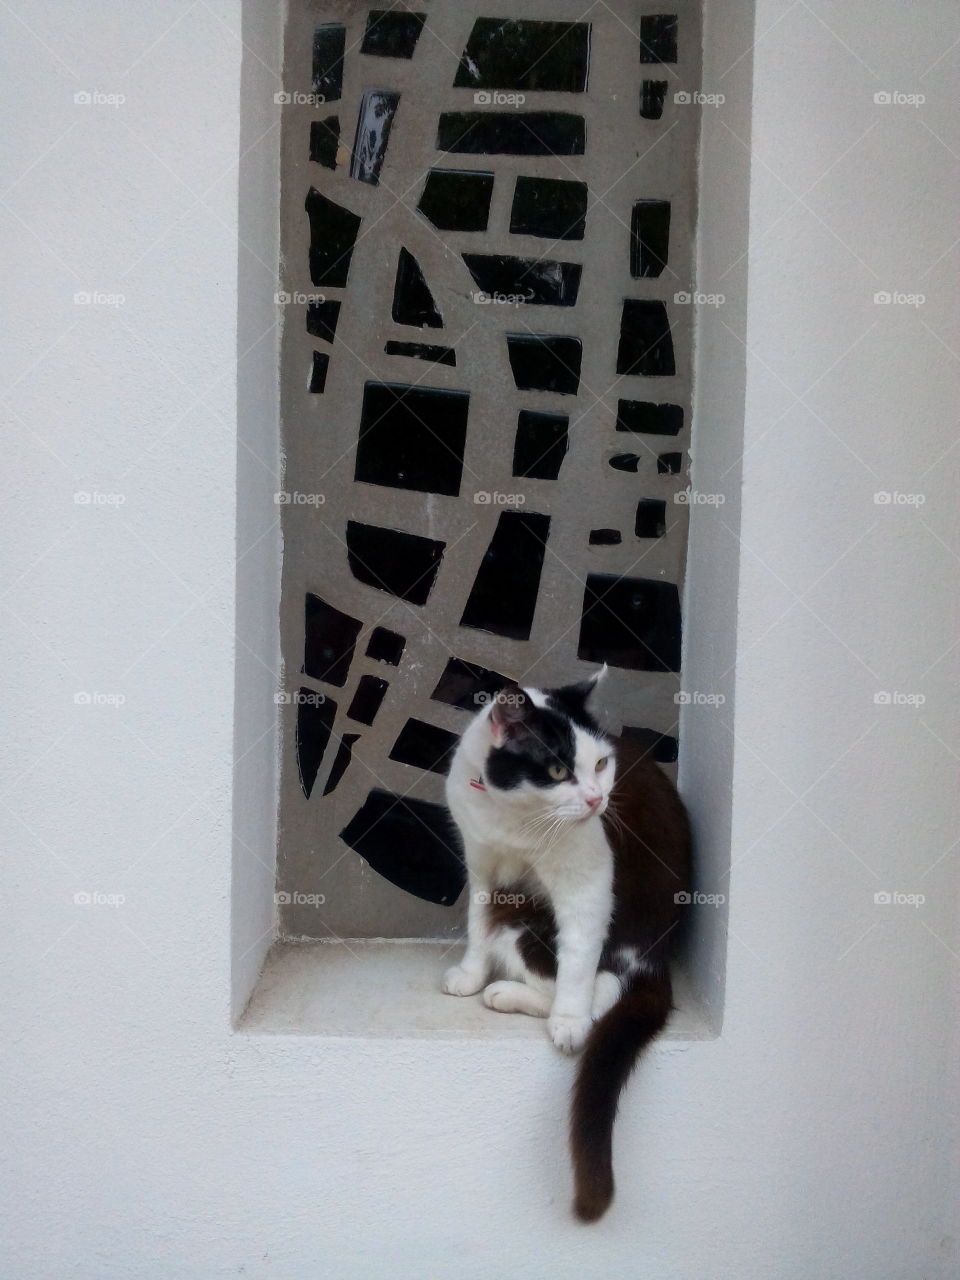 Beautiful black and white cat sitting - Stained glass window background